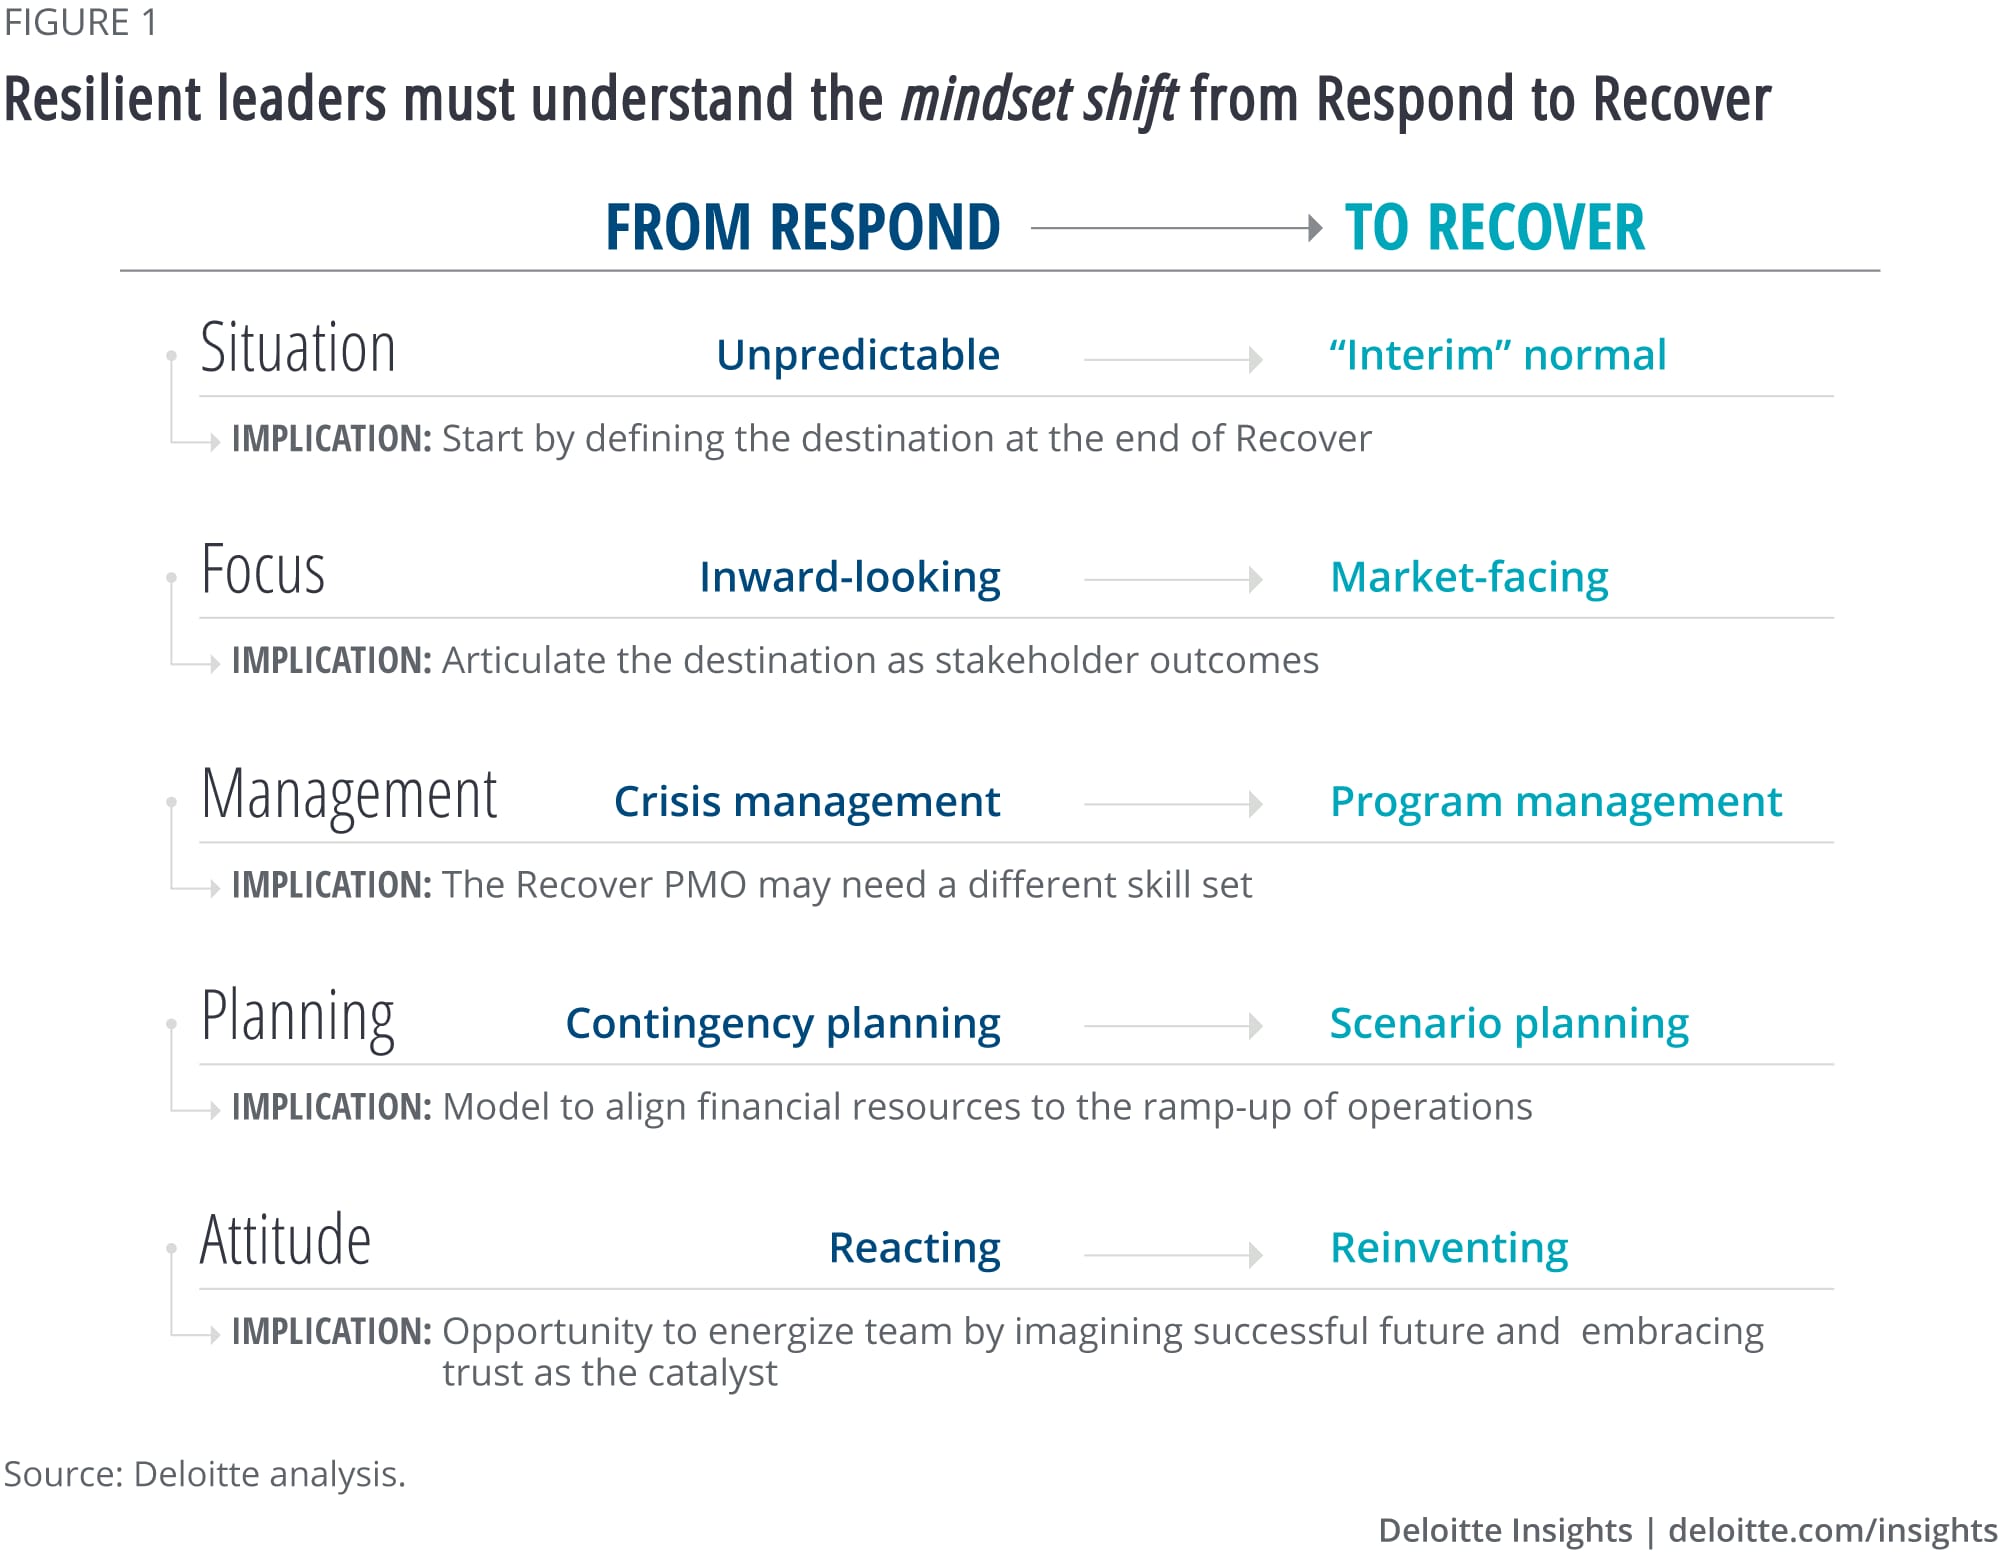 Resilient leaders must understand the mindset shift from Respond to Recover